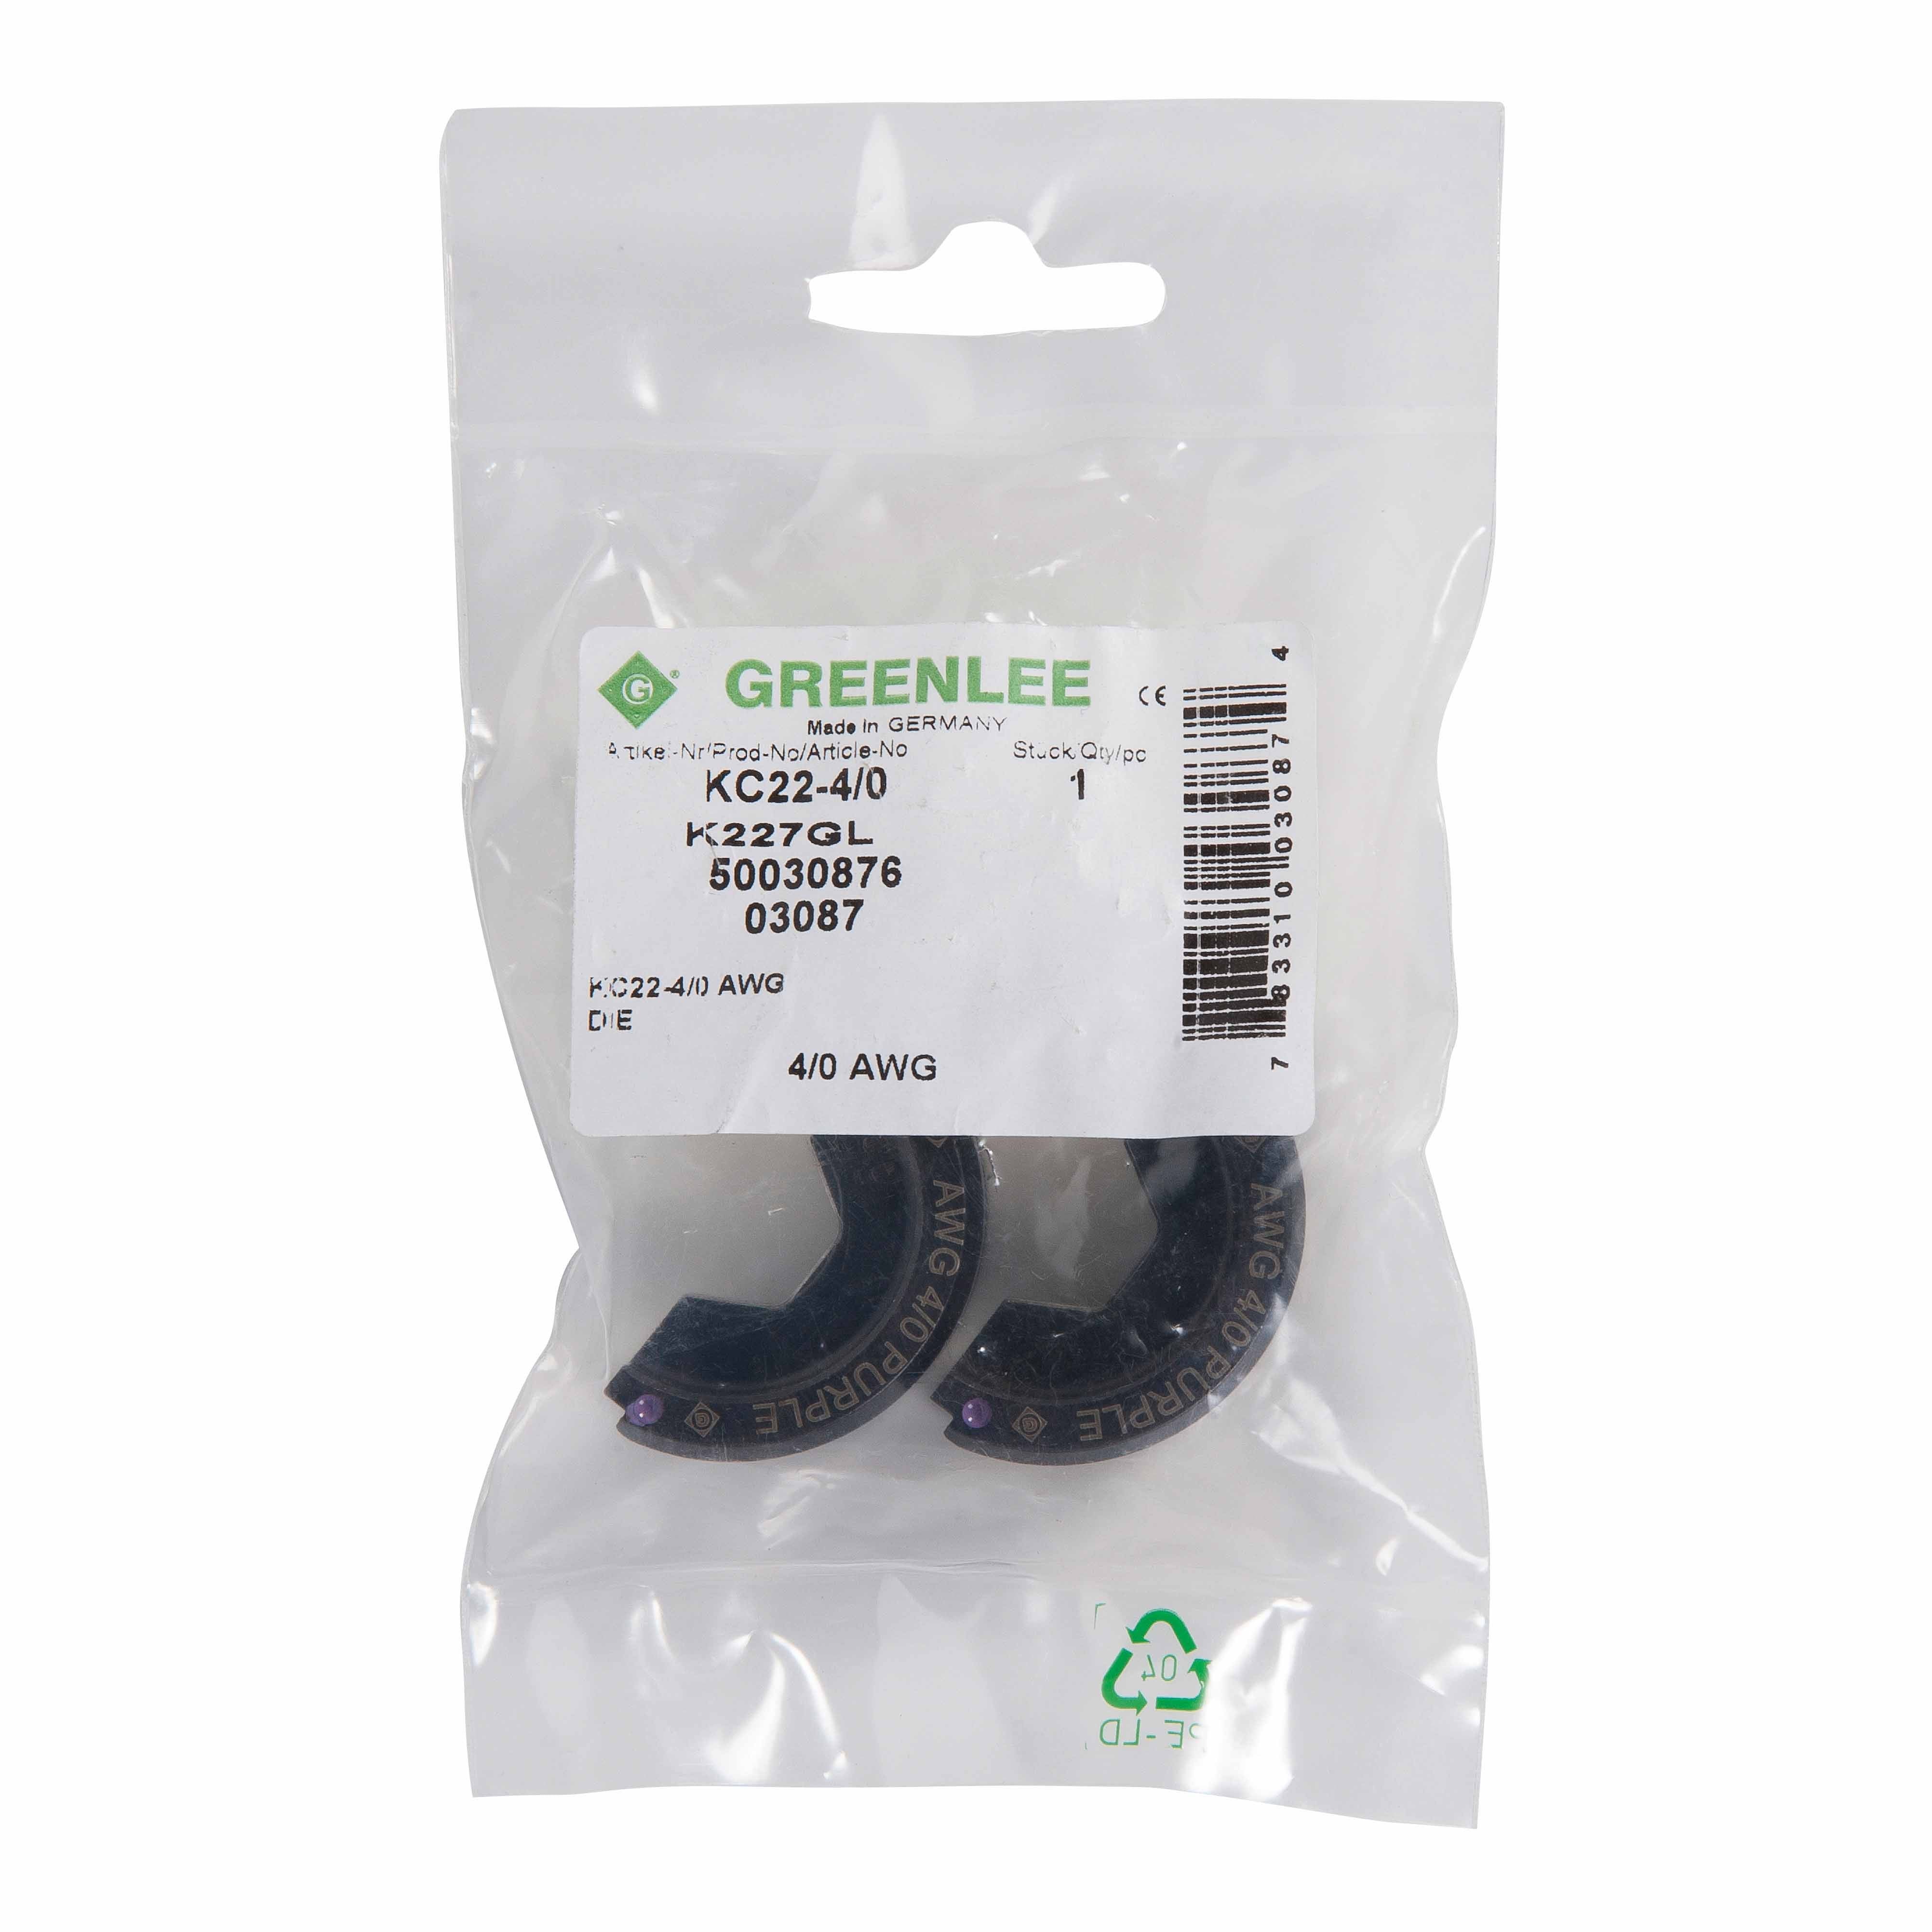 Greenlee KC22-4 6-Ton Crimping Die for 4 AWG Cable